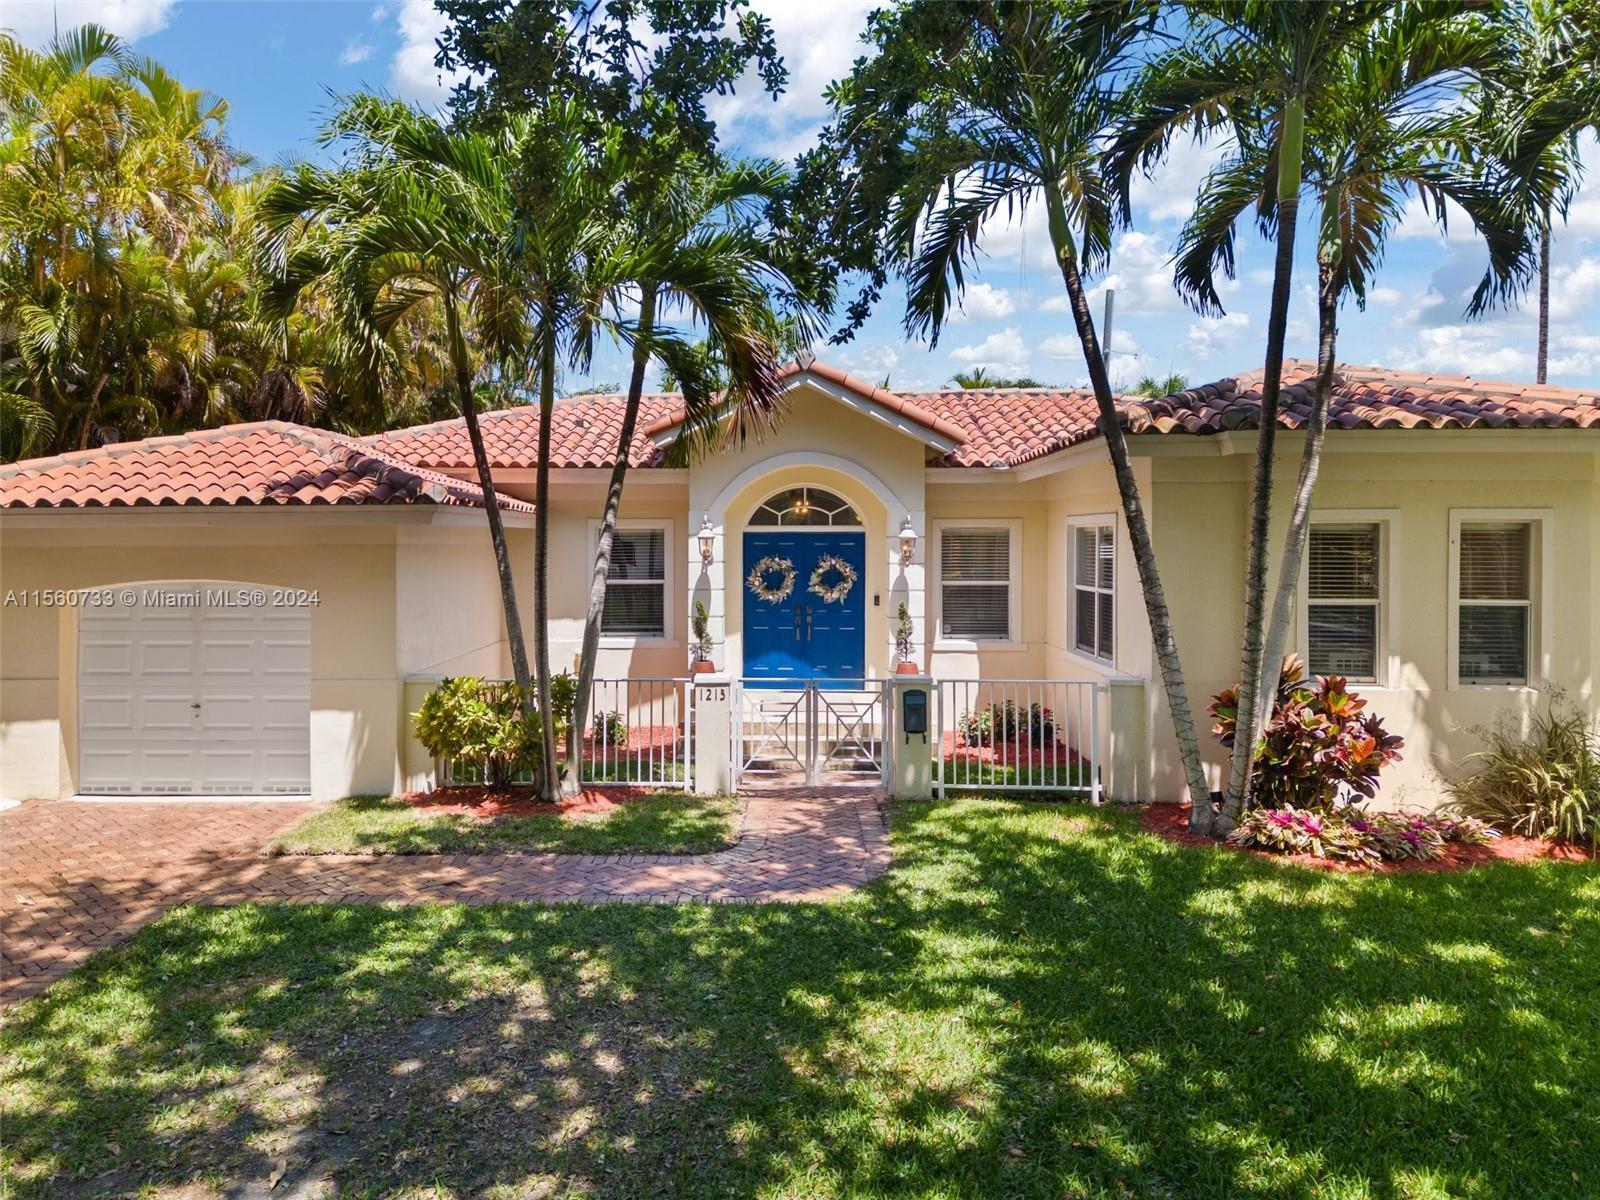 Photo of 1213 Andora Ave in Coral Gables, FL